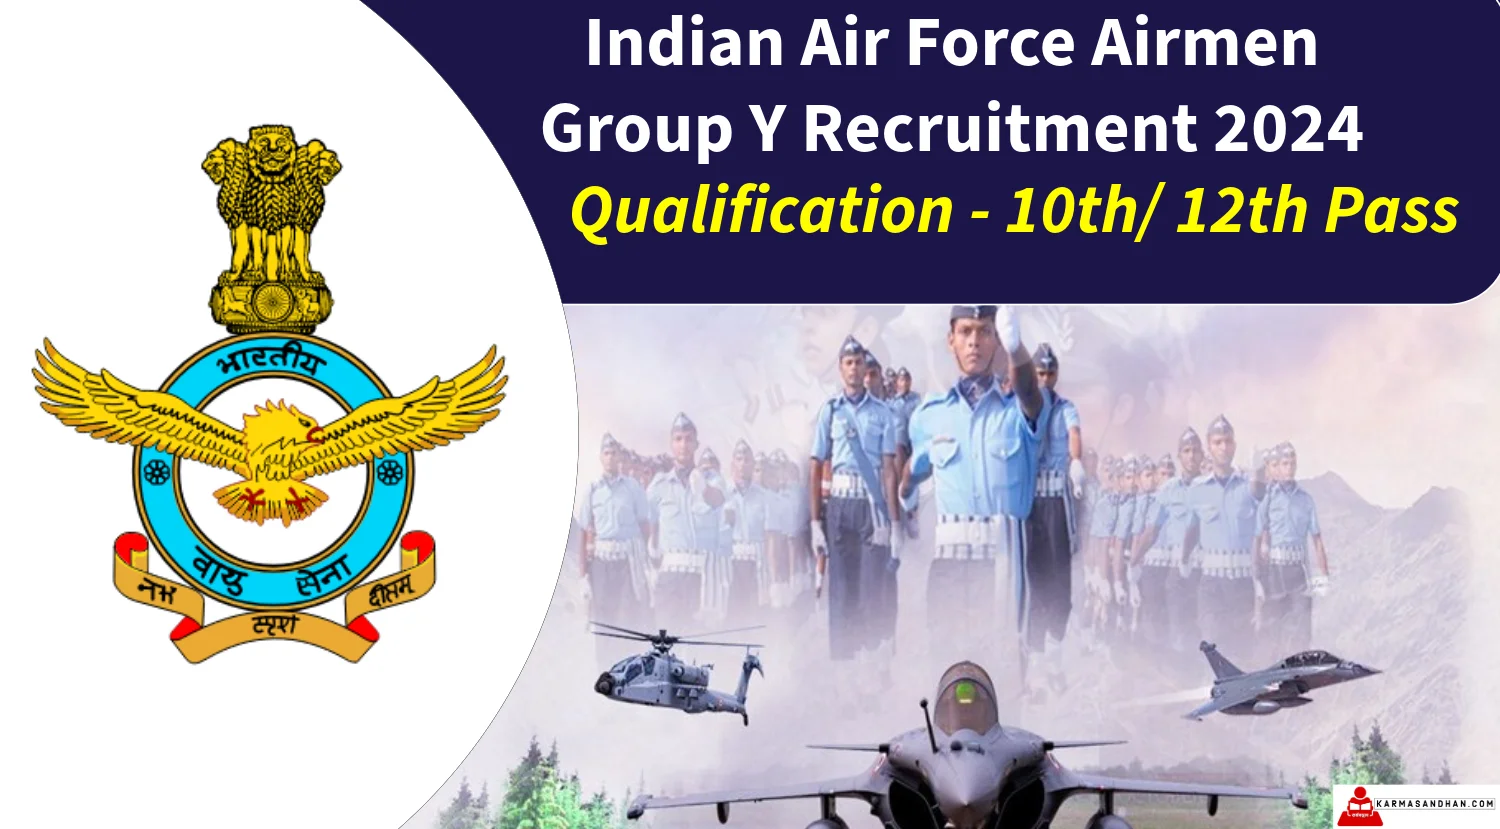 Air Force Airman Recruitment 2024, Check Eligibility Details for IAF Group Y Medical Assistant Now